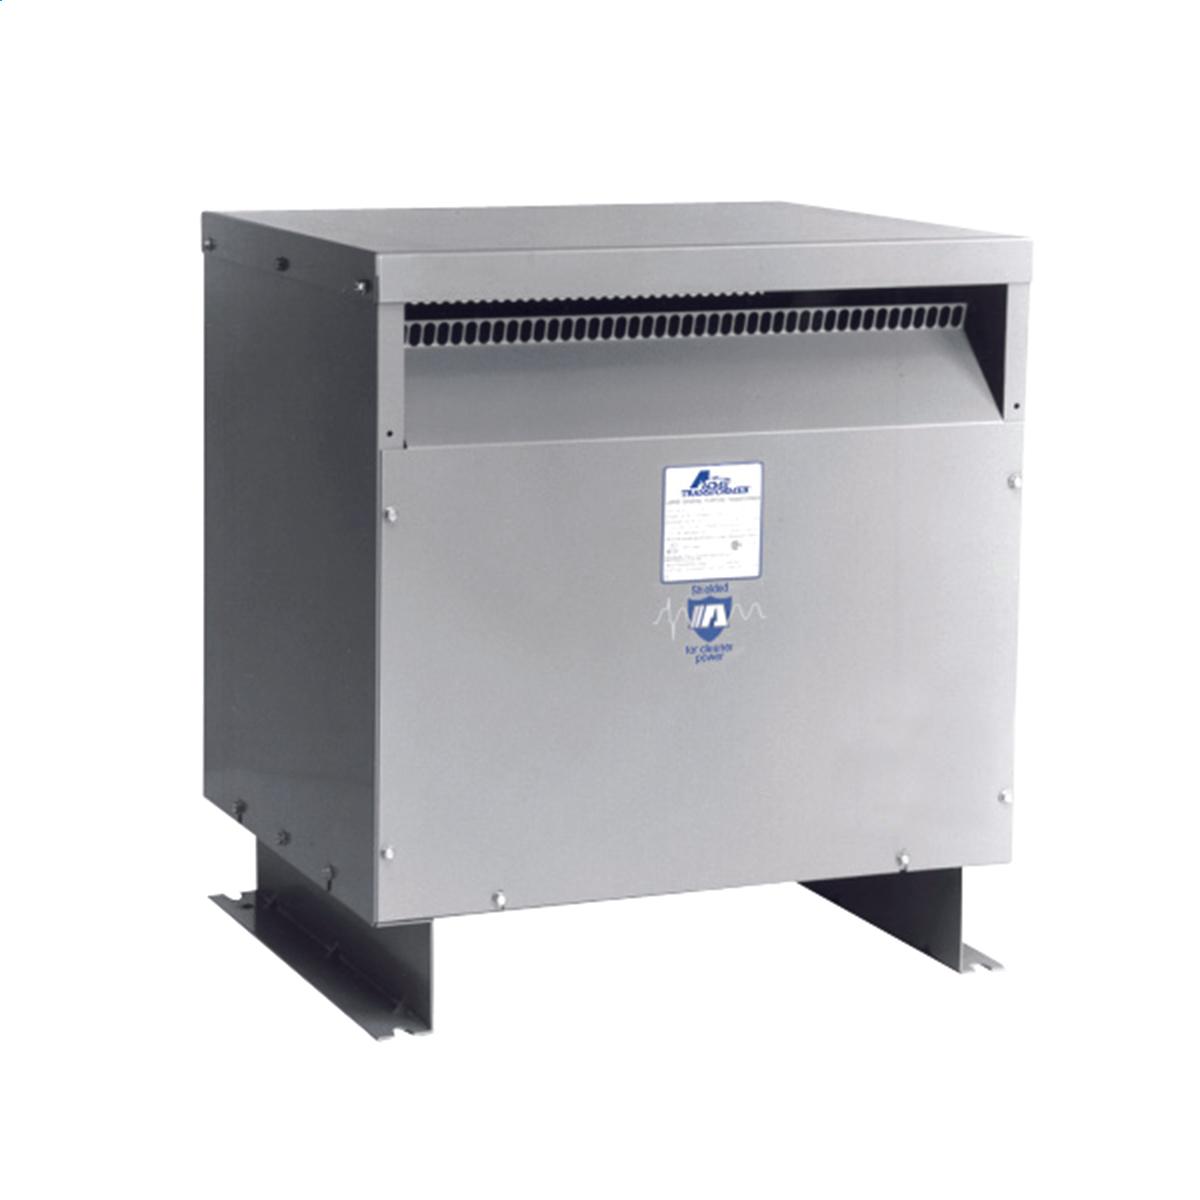 Hubbell WI045K12 Medium Voltage Transformer - Three Phase, 2400Δ - 480ΔV, 45kVA  ; Lower operating cost over Liquid-filled ; No additional fireproofing or venting ; Long life expectancy ; Smaller, lighter easy to maintain